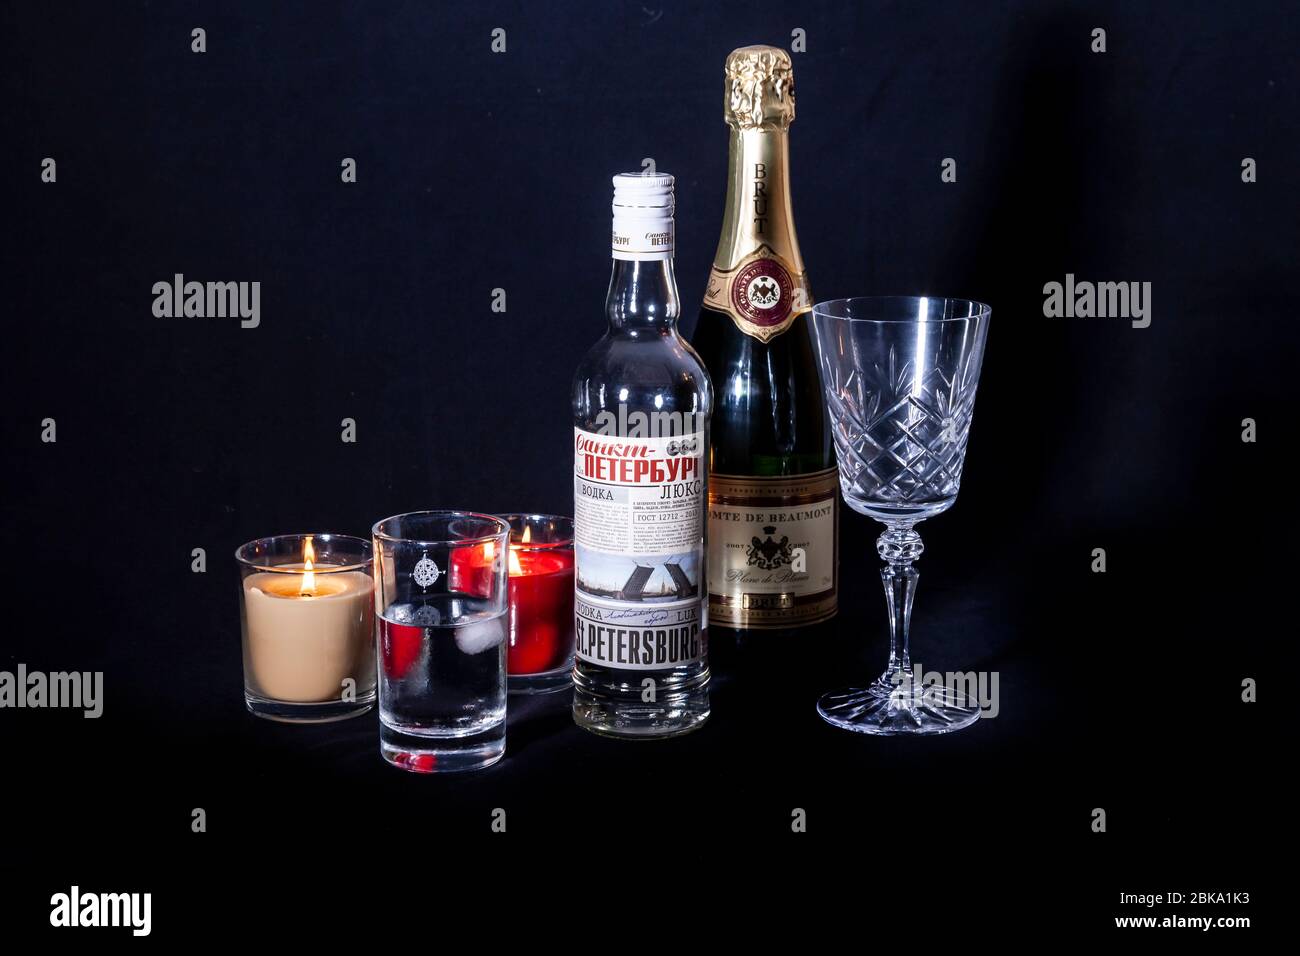 Bottles of drink against a black background Stock Photo